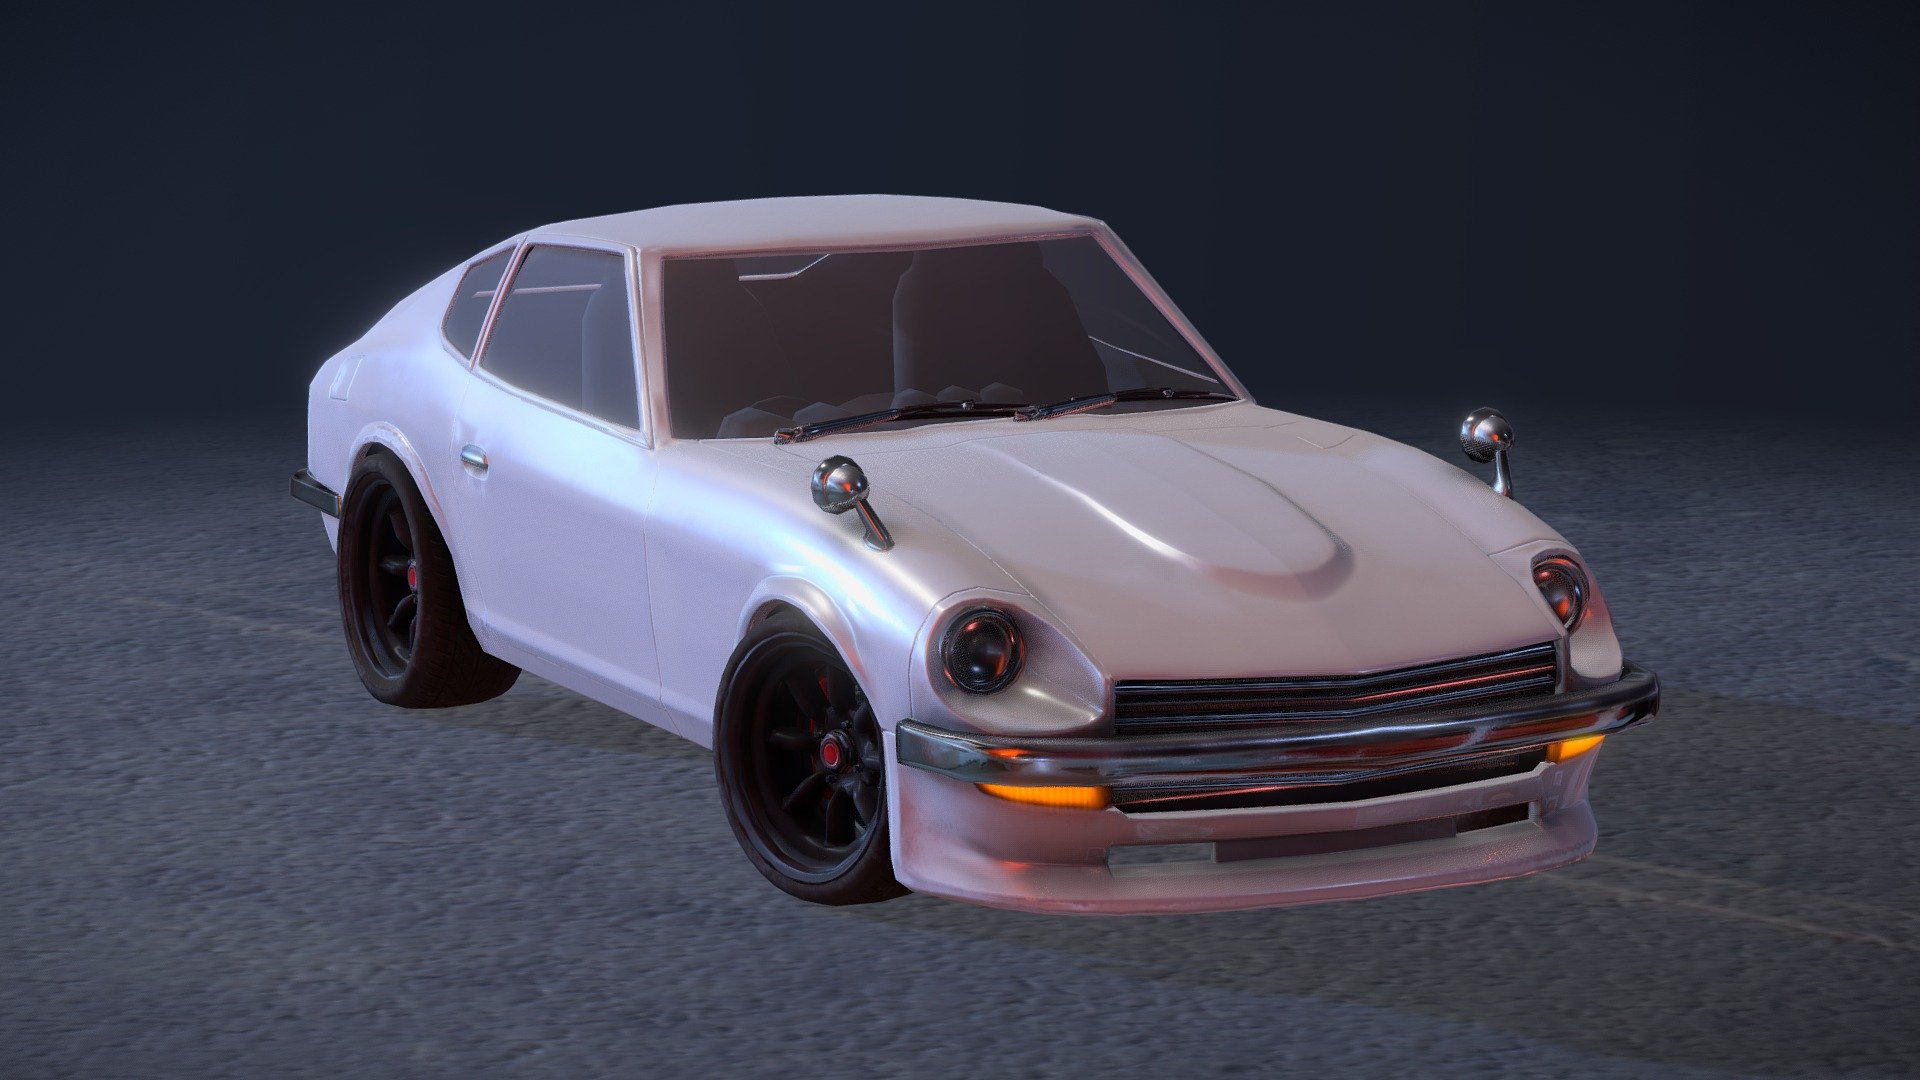 Classic Fairlady Z (Nissan S30, Datsun 240Z) 1970 - 1973.

Around 26 k tris, used as an exercise on hardsurface and automotive modelling, all modelled in Blender and Substance Painter for texturing 3d model